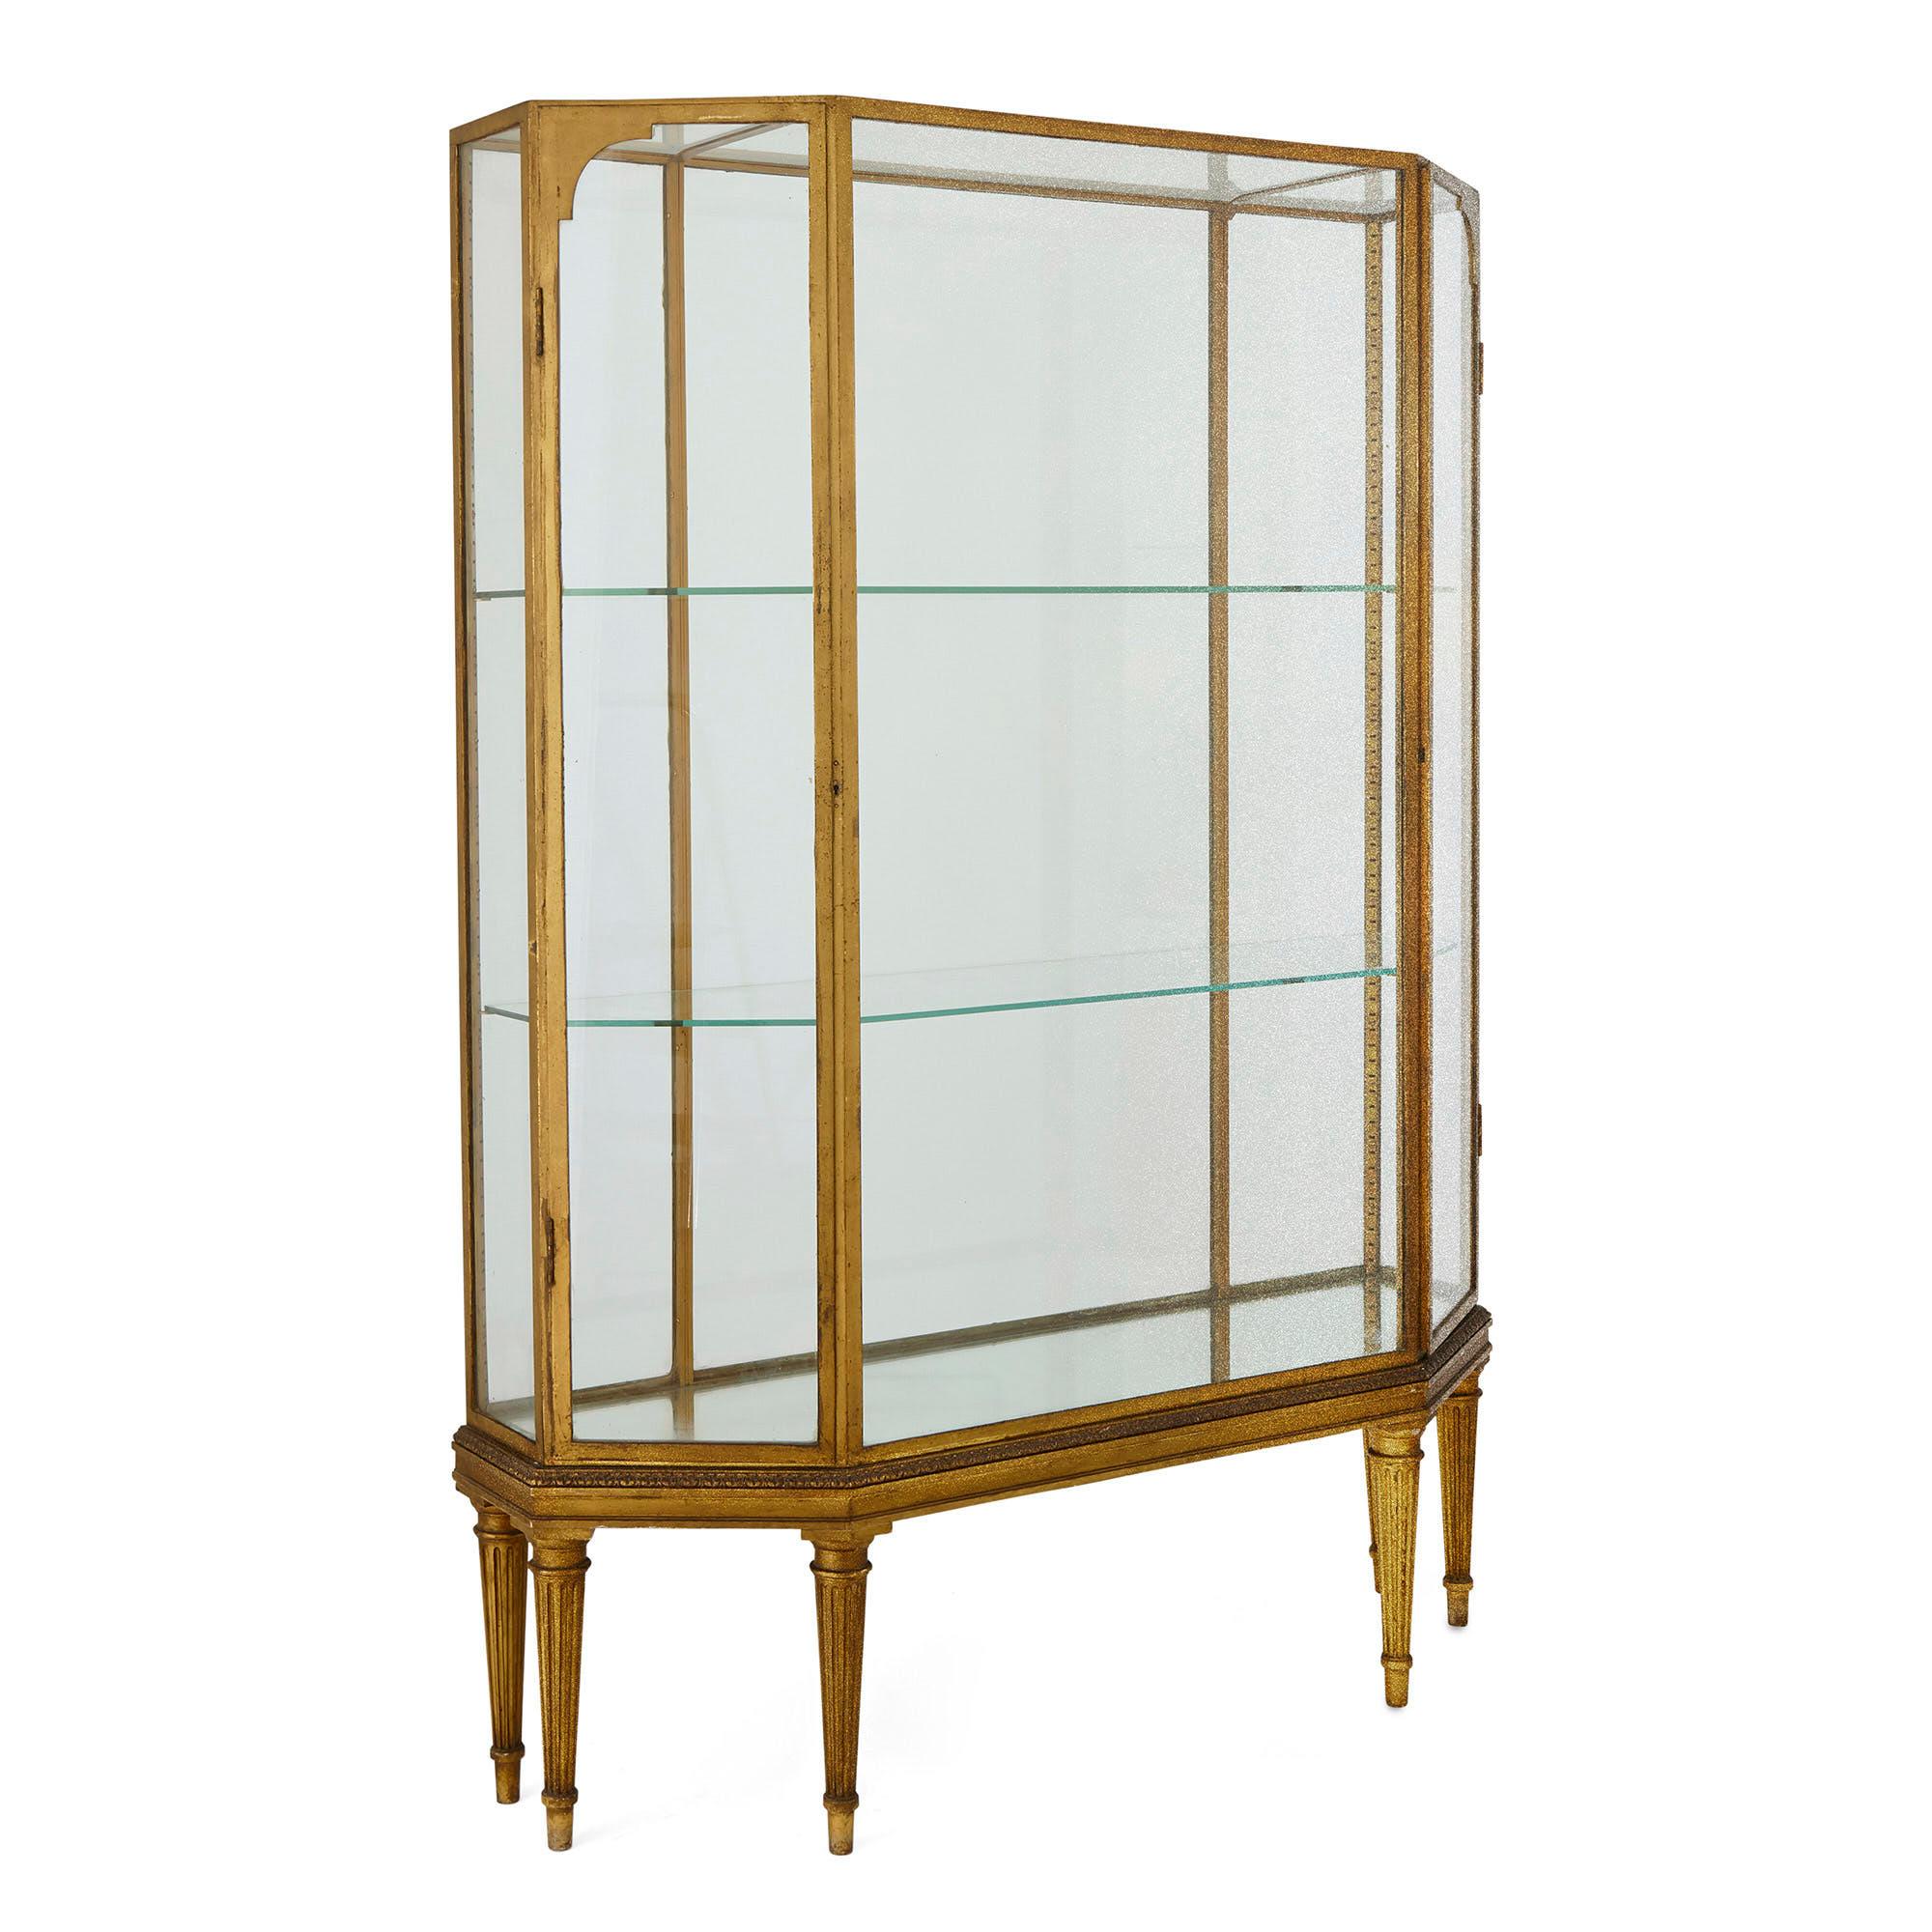 Early 20th century French giltwood display cabinet
French, early 20th century
Measures: Height 175cm, width 130cm, depth 40cm

This beautiful early 20th Century display cabinet is wrought from giltwood, gilt-metal, glass, and mirror. The cabinet